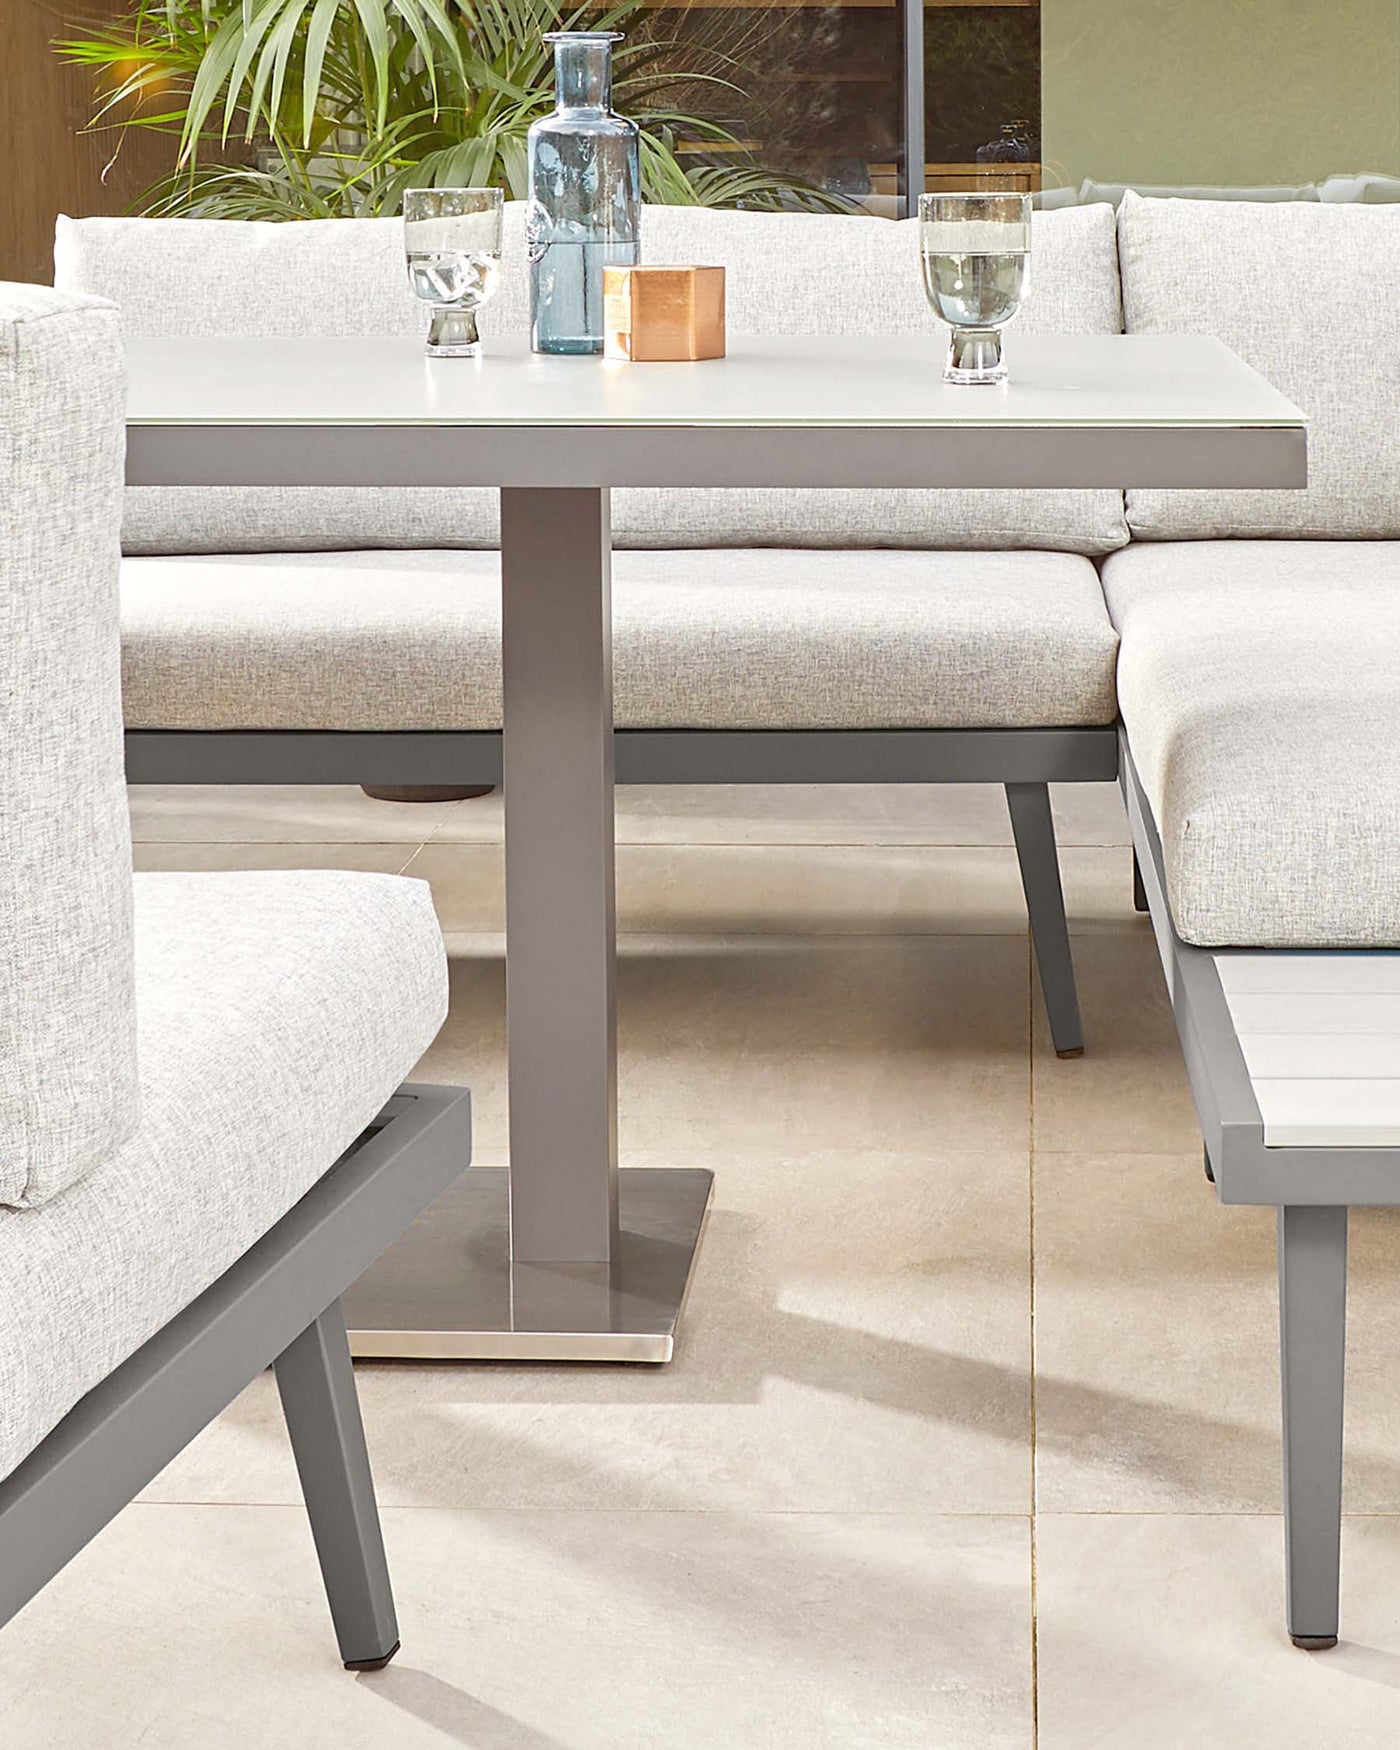 Modern outdoor furniture featuring a minimalist light grey rectangular dining table with a sturdy central metal pedestal base and a sleek matching bench with light taupe cushions. The set projects a contemporary, understated style suitable for urban terraces or chic garden spaces.